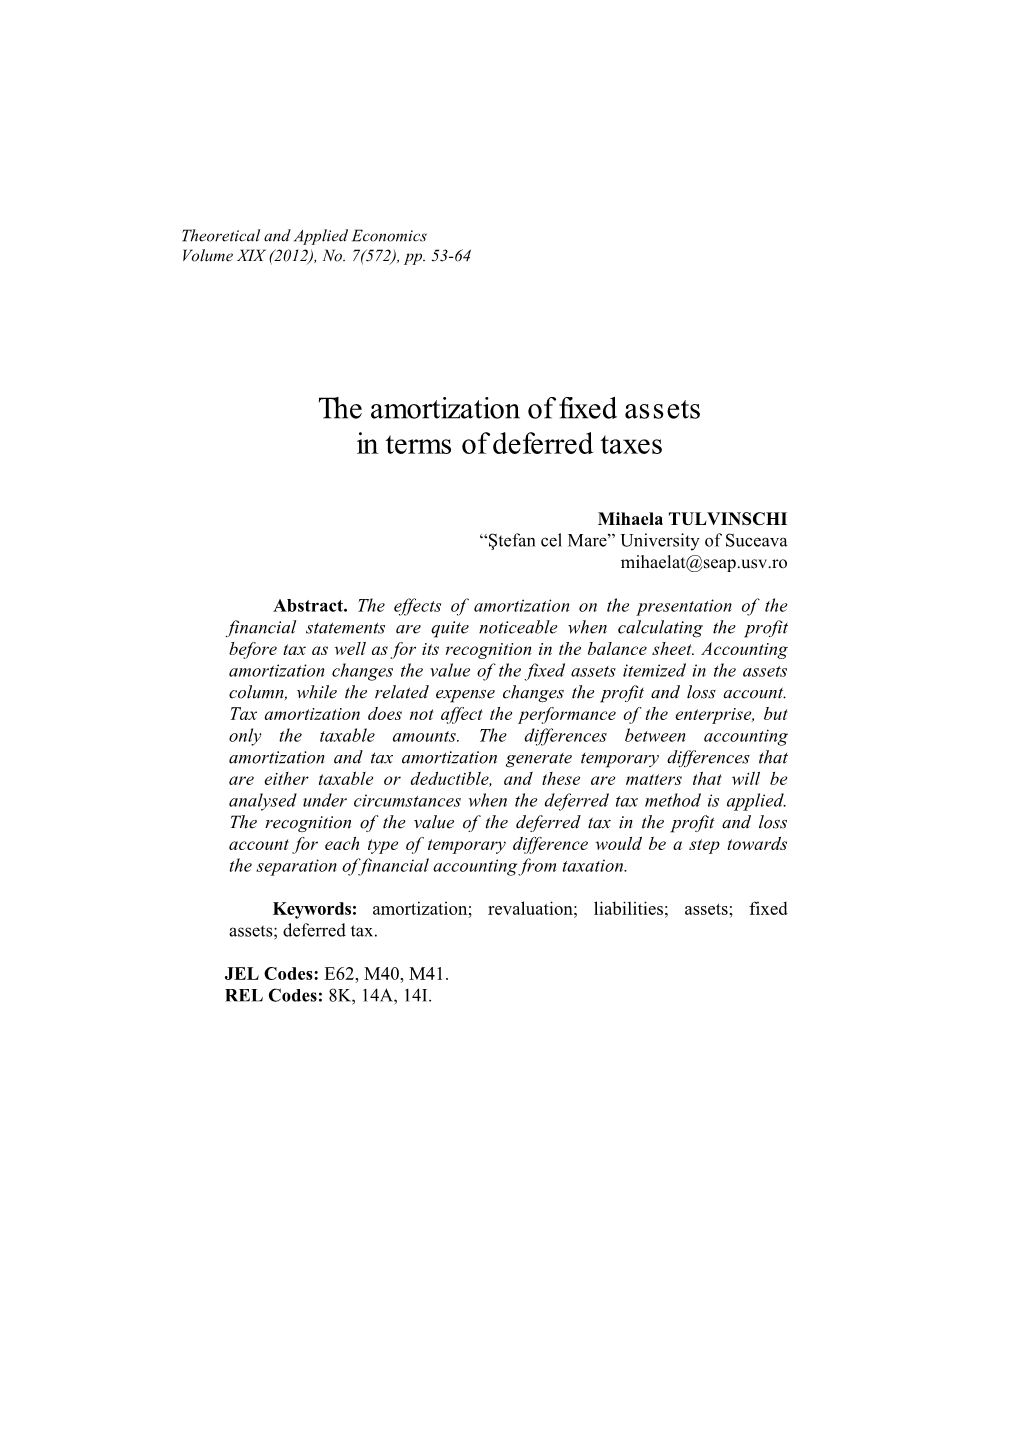 The Amortization of Fixed Assets in Terms of Deferred Taxes